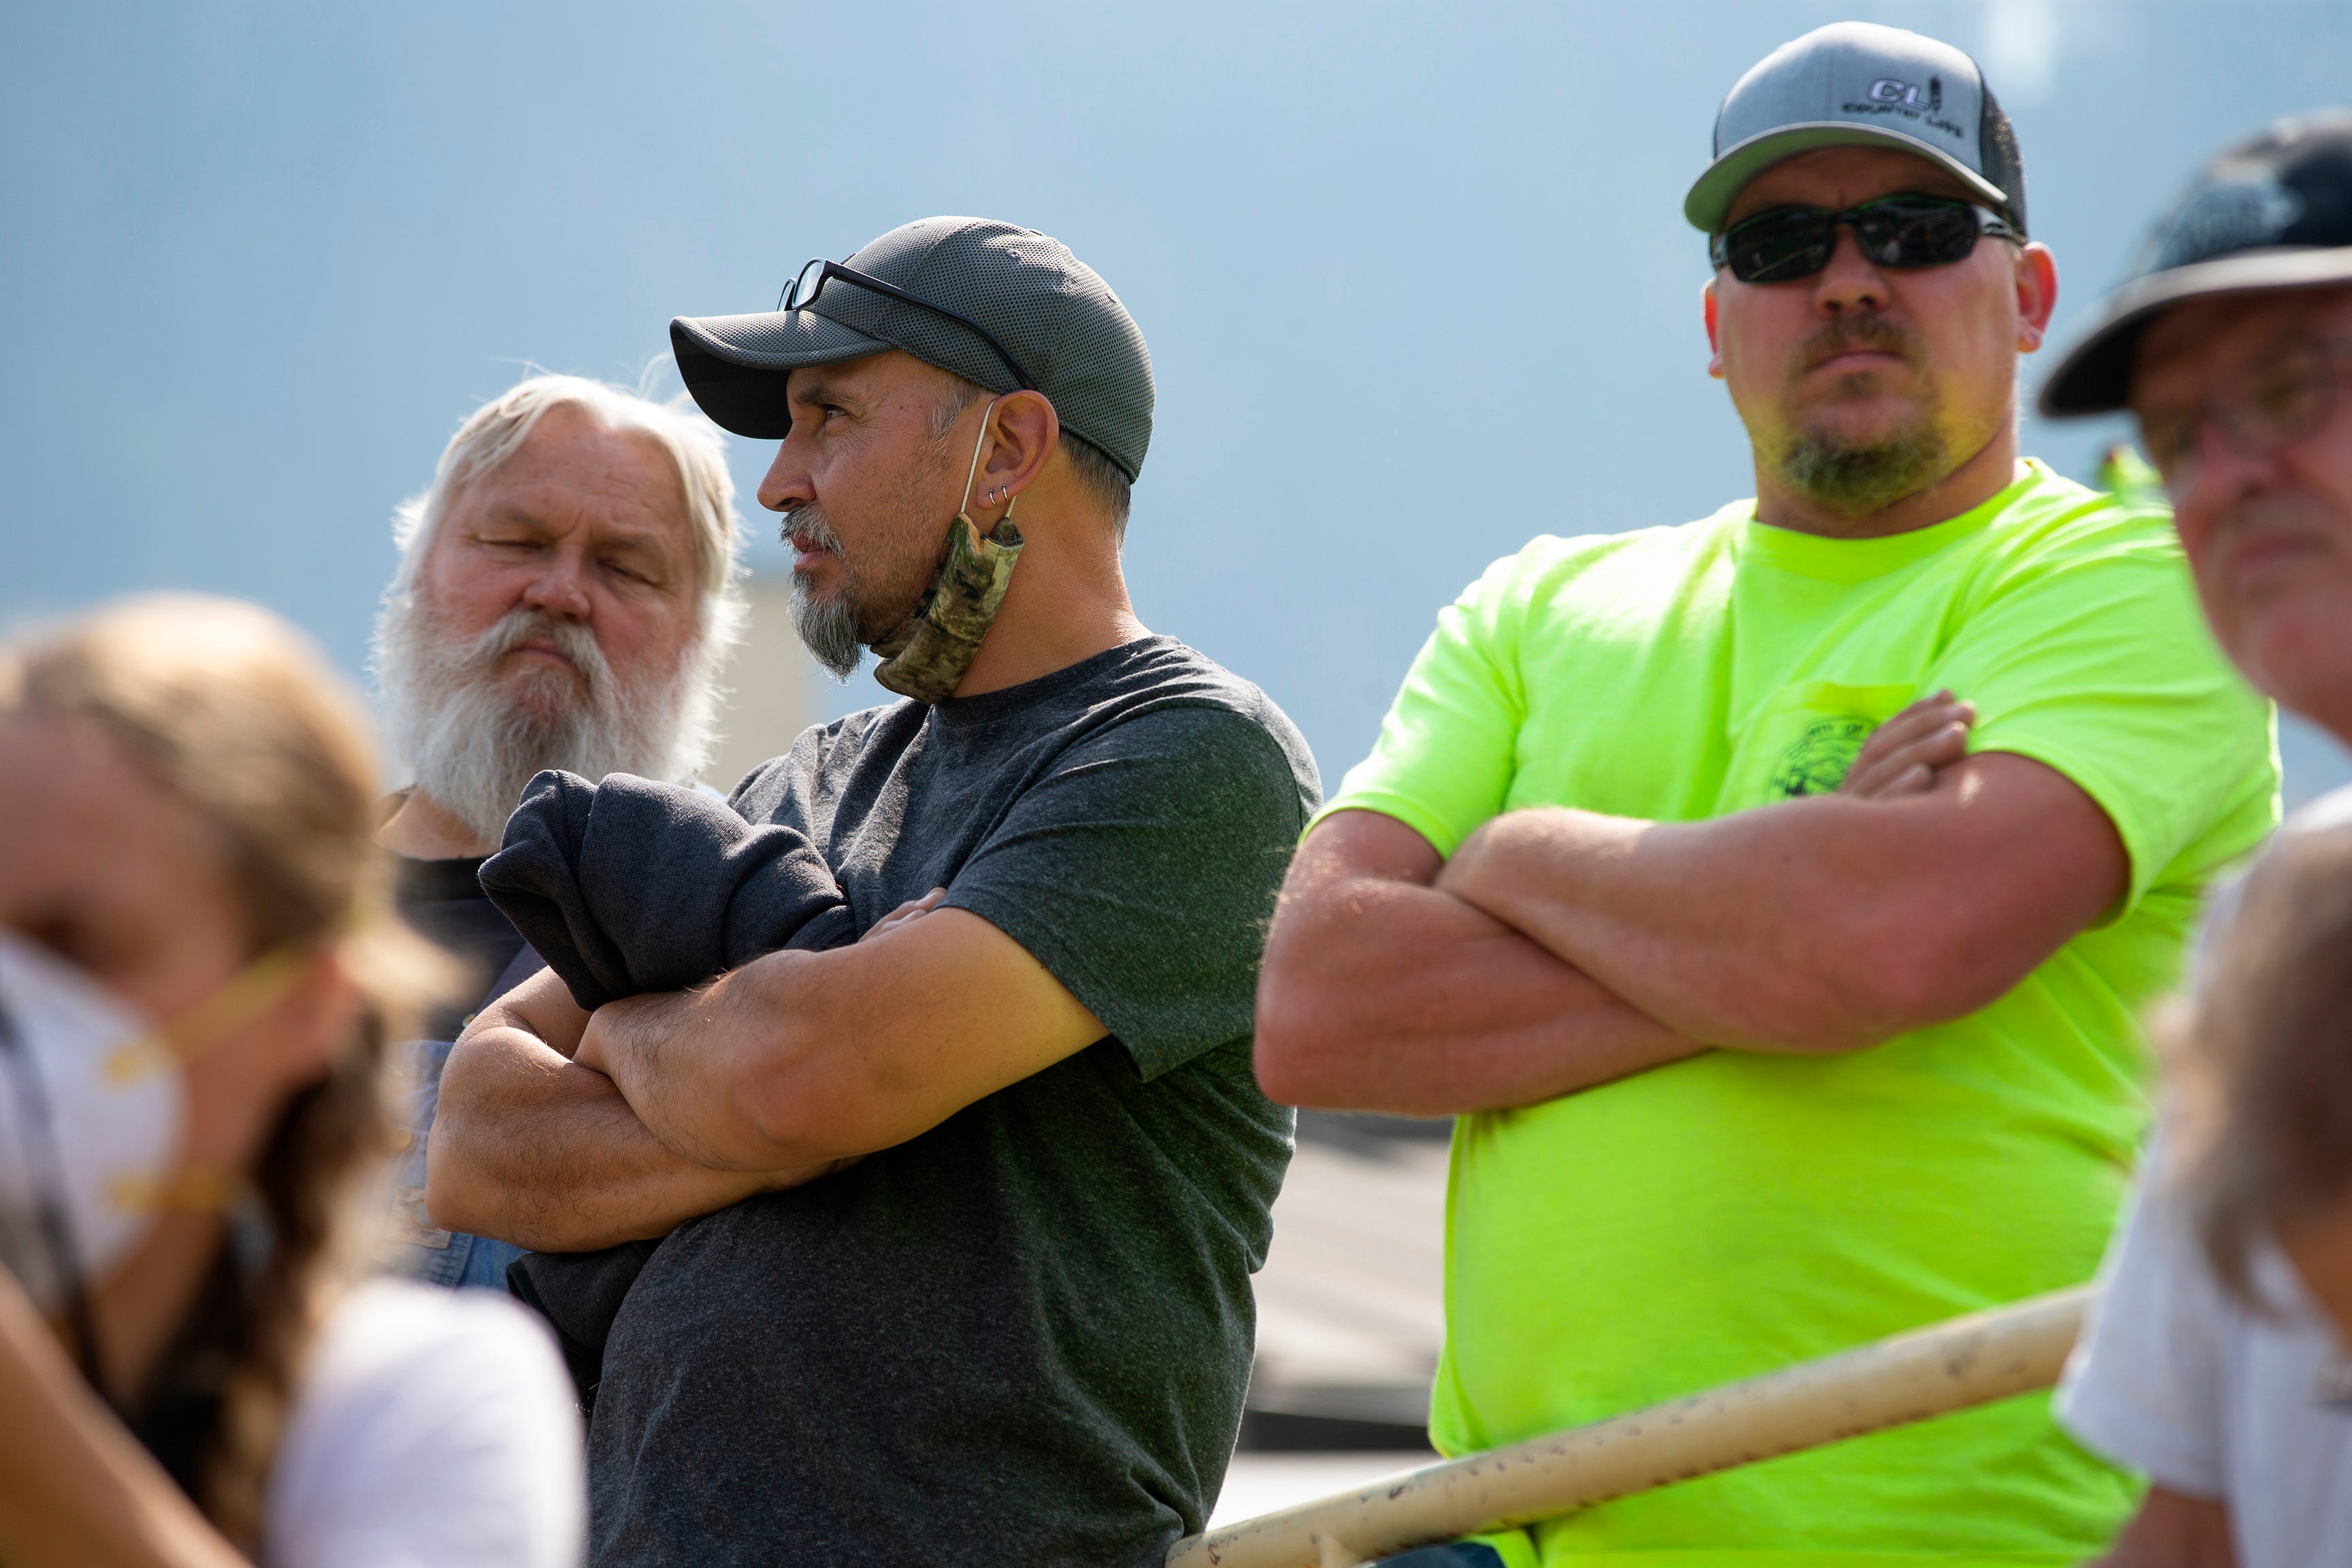 Leeon Hillman (center) and his wife, Erin, lost their Happy Camp home to the Slater Fire on Sept. 9, 2020. Leeon attends a community meeting on Sept. 23 at Happy Camp High School.